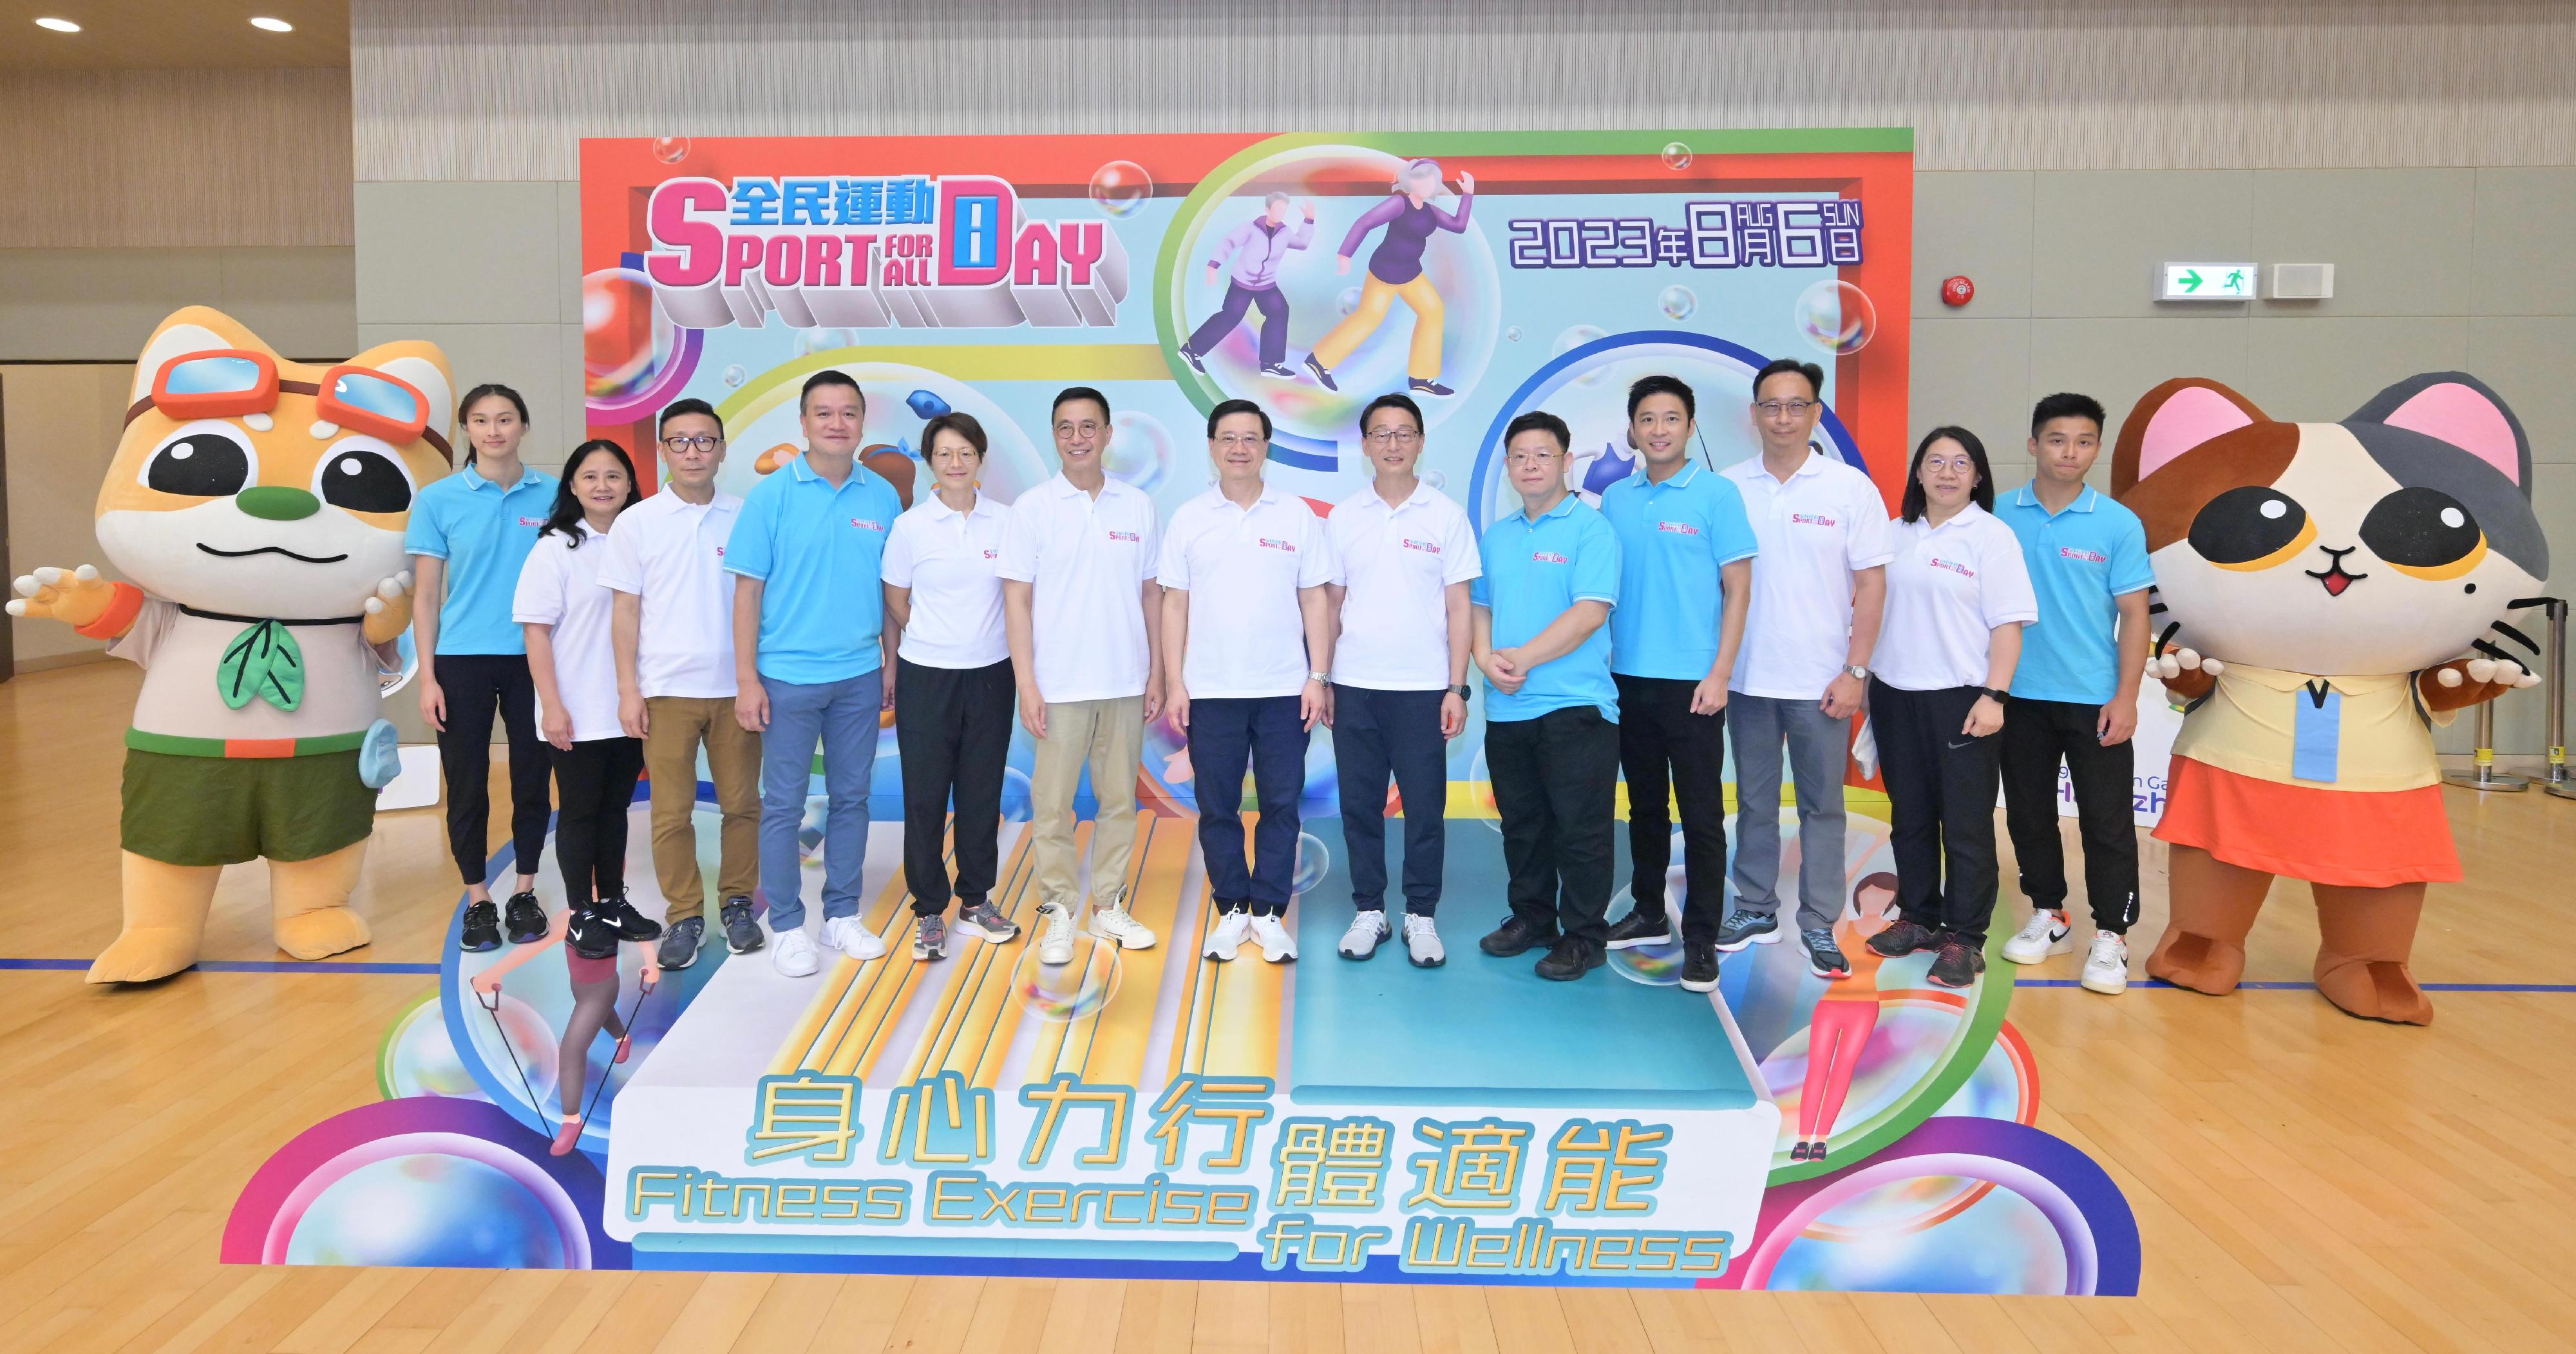 The Chief Executive, Mr John Lee, attended the Sport For All Day 2023 held by the Leisure and Cultural Services Department at the Sham Shui Po Sports Centre and took part in sports fun games this afternoon (August 6). Photo shows Mr Lee (centre); the Secretary for Culture, Sports and Tourism, Mr Kevin Yeung (sixth left); the Director of Leisure and Cultural Services, Mr Vincent Liu (sixth right); the Deputy Director of Leisure and Cultural Services (Leisure Services), Miss Winnie Chui (fifth left); the Chairman of the Sham Shui Po District Council, Mr Chum Tak-shing (fifth right); the Chairman of the Community Sports Committee (CSC), Professor Patrick Yung (fourth left); the Vice Chairman of the CSC, Mr Eric Fok (fourth right); the District Officer (Sham Shui Po), Mr Paul Wong (third left); the Assistant Director of Leisure and Cultural Services (Leisure Services)1, Mr Henry Wong (third right); the Assistant Director of Leisure and Cultural Services (Leisure Services)3, Ms Fung Miu-ling (second right); the Acting Assistant Director of Leisure and Cultural Services (Leisure Services)2, Ms Alice Kong (second left); swimming athlete Tam Hoi-lam (first left) and wushu athlete Lau Tsz-hong (first right) in front of a 3D display board of the Sport For All Day 2023.
